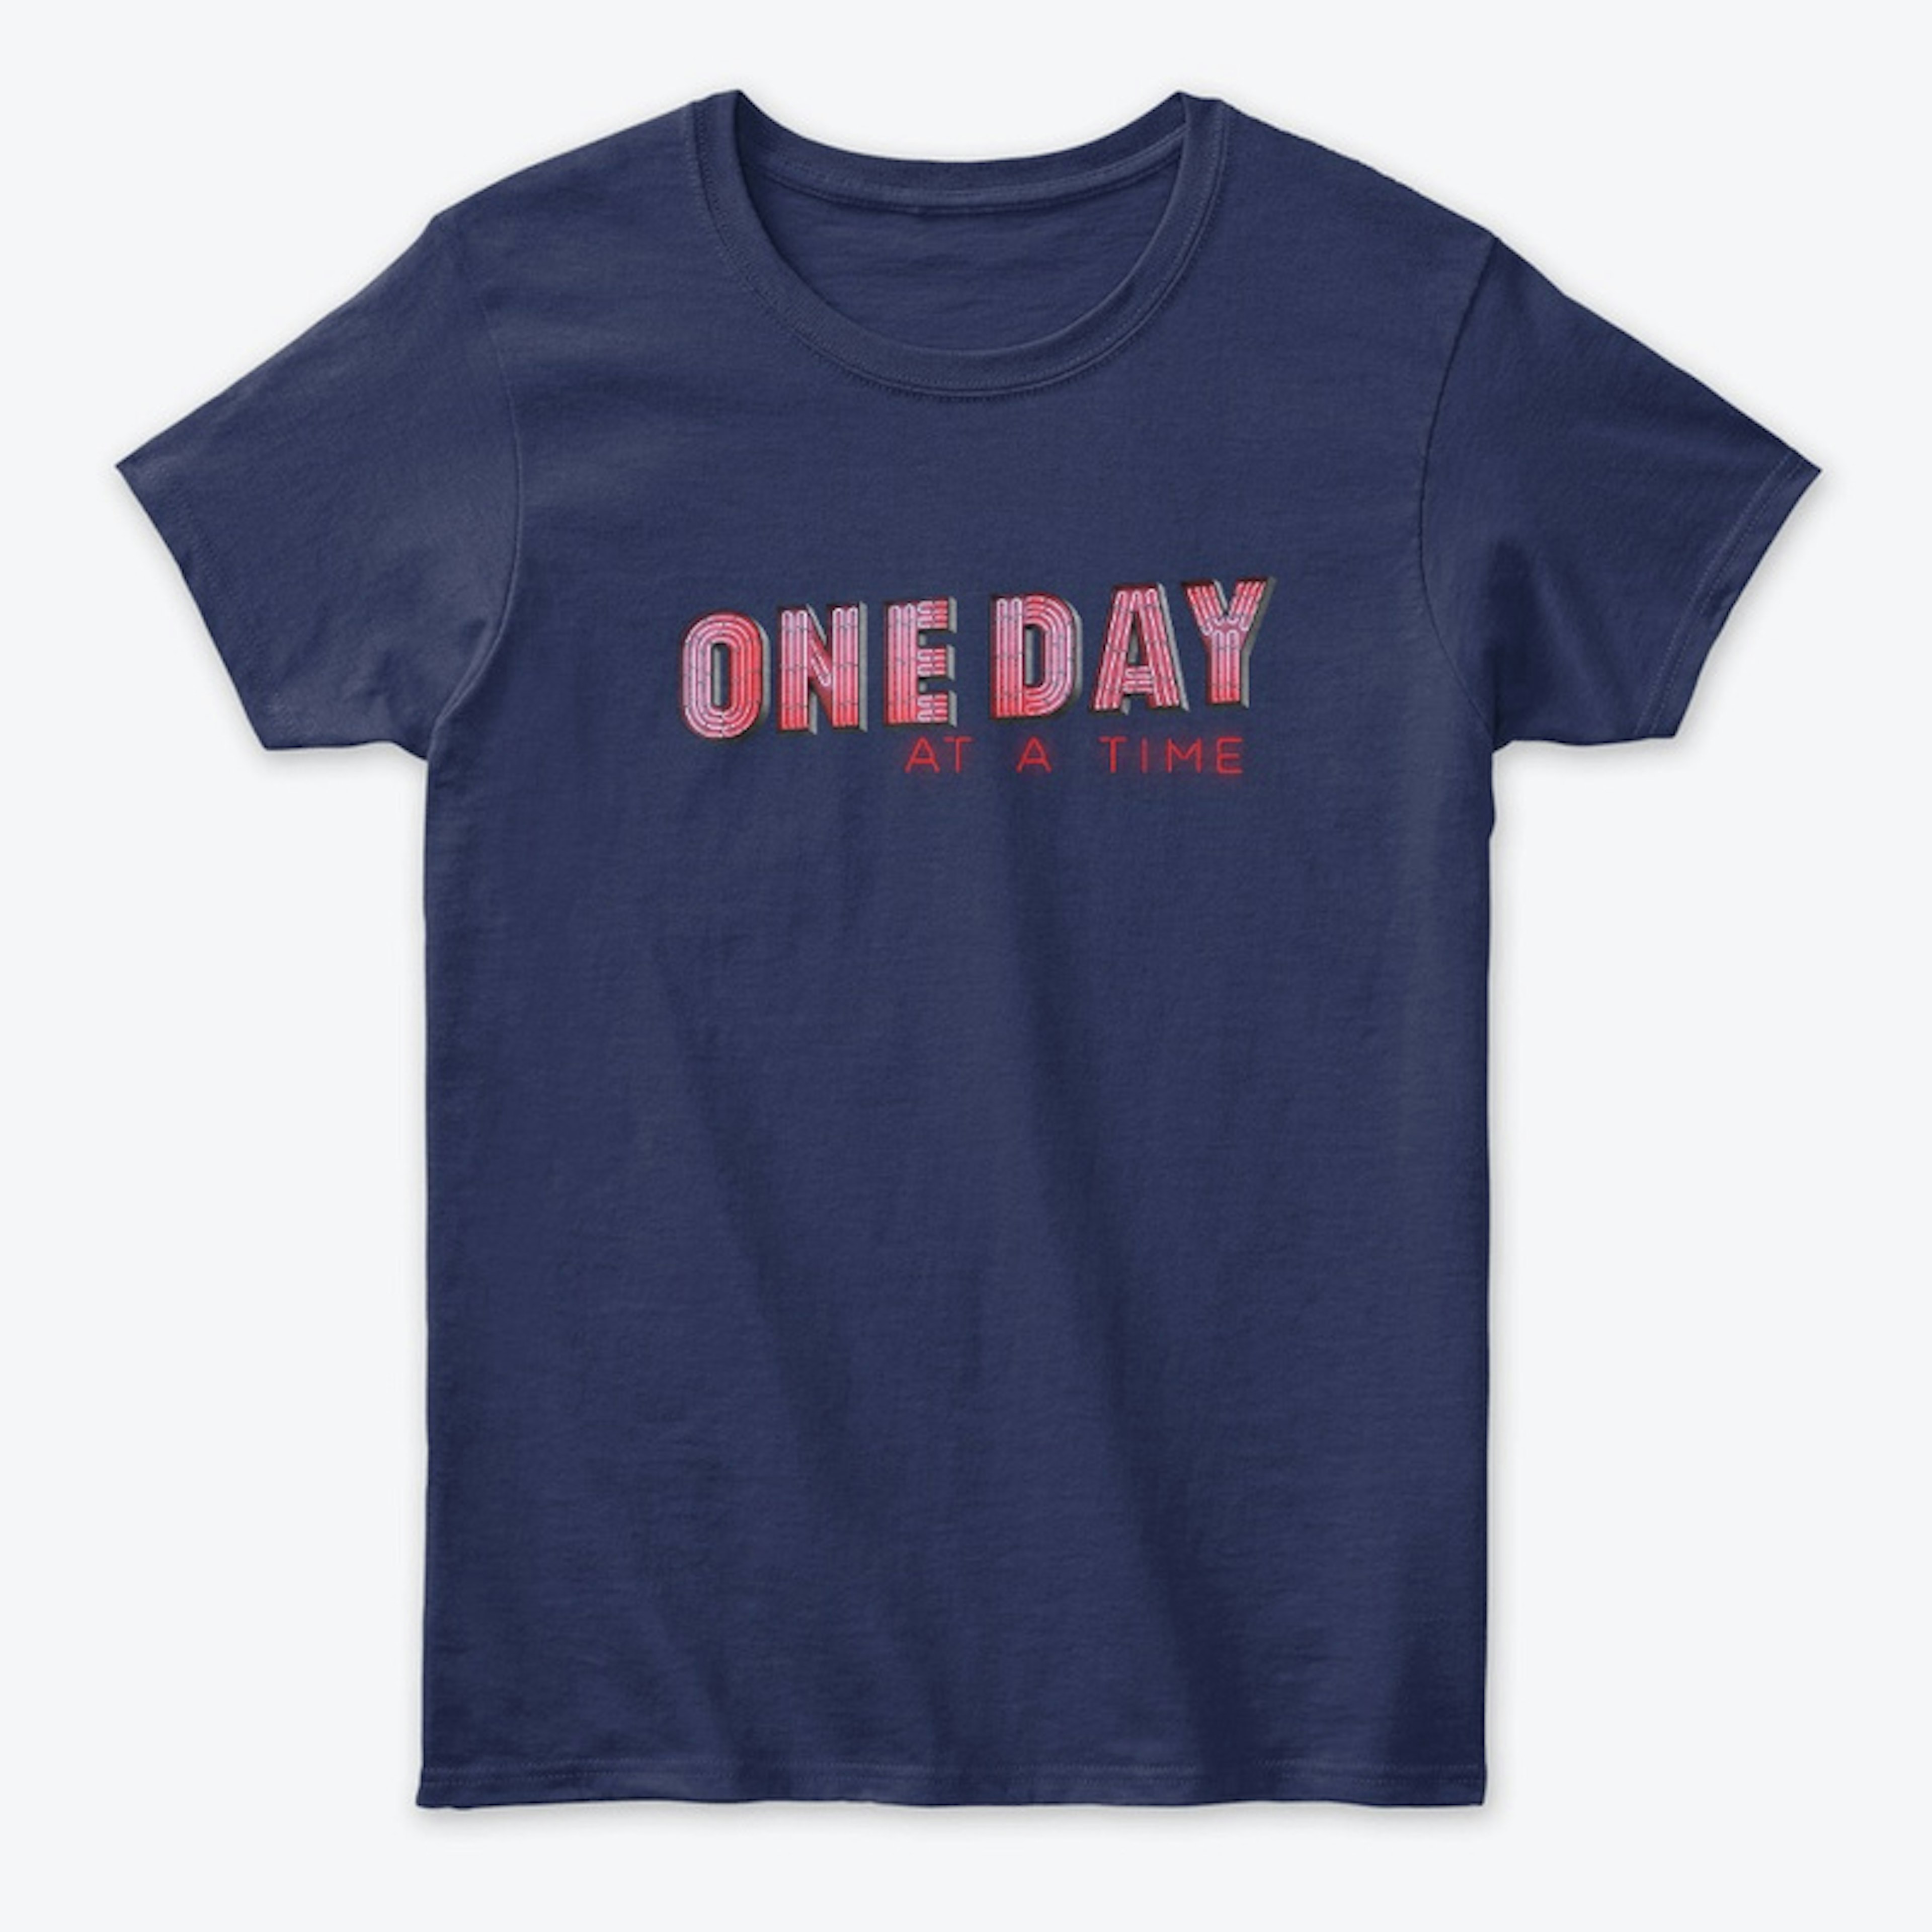 "One Day at a Time" Signage Quote